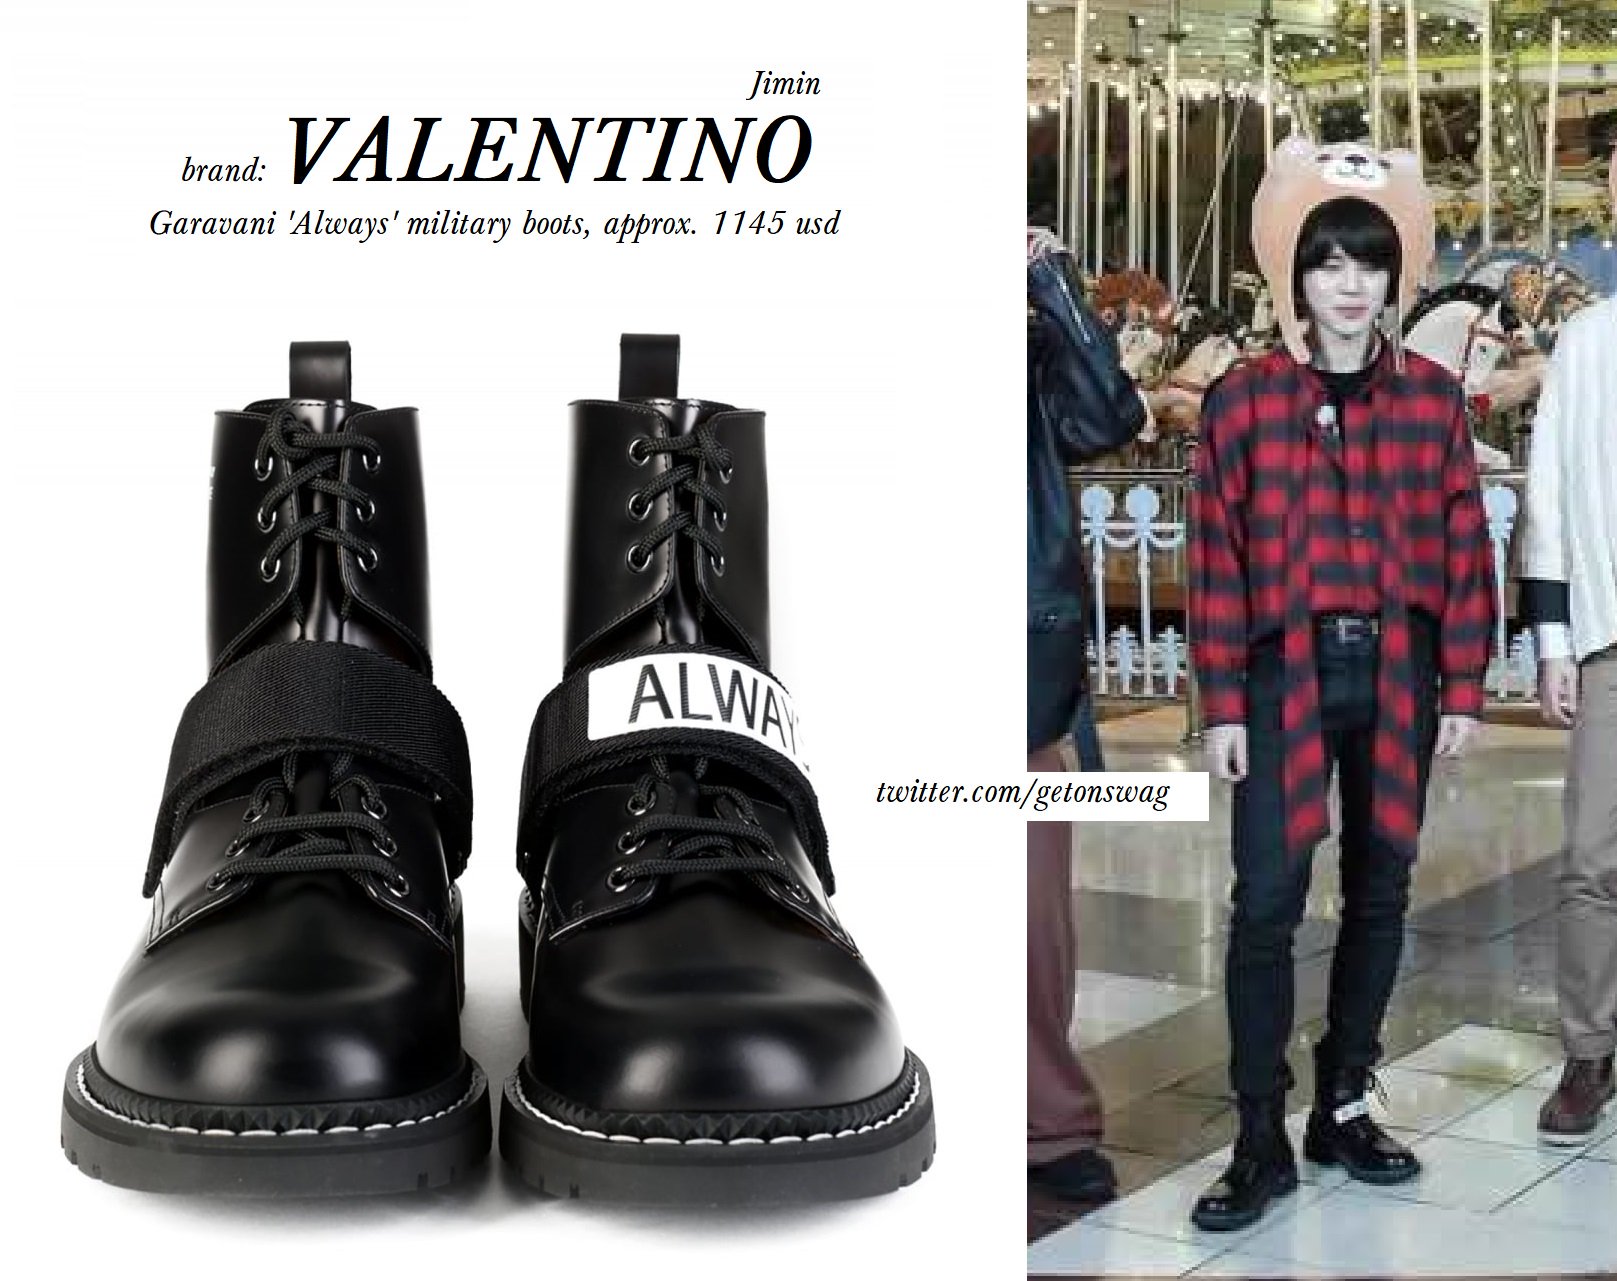 Jimin and Jungkook's louis vuitton oberkampf ankle boots